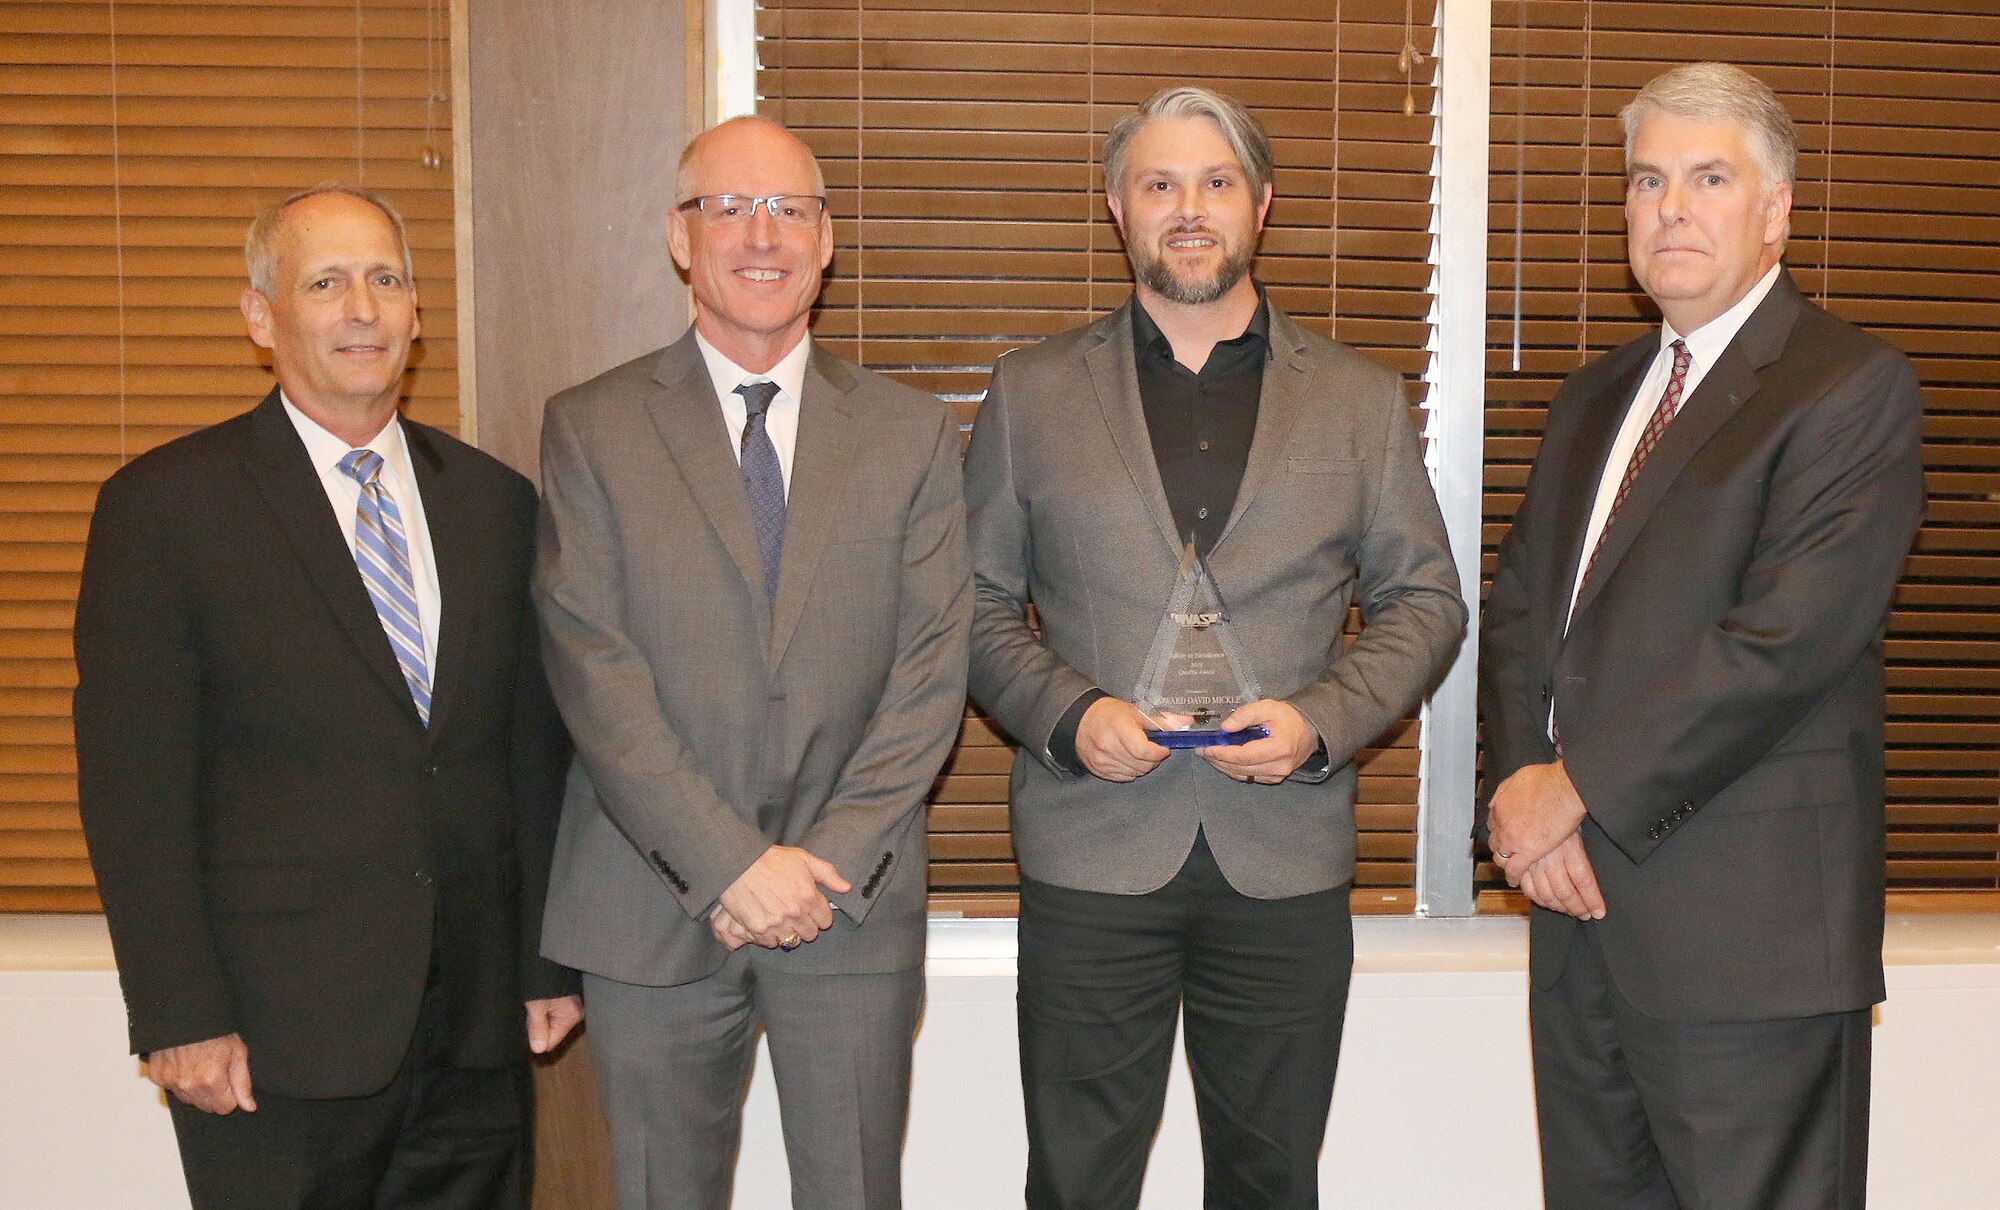 Acting Work Control Supervisor Edward D. Mickle (third from left) receives the Quality Award during the National Aerospace Solutions, LLC Salute to Excellence Annual Award Ceremony Nov. 14, 2018, at the Arnold Lakeside Center, Arnold Air Force Base, Tenn. Also pictured from left is NAS Deputy General Manager Michael Belzil, NAS General Manager Richard Tighe and NAS Test and Sustainment Engineering Manager Jeff Henderson. (U.S. Air Force photos by Bradley Hicks)